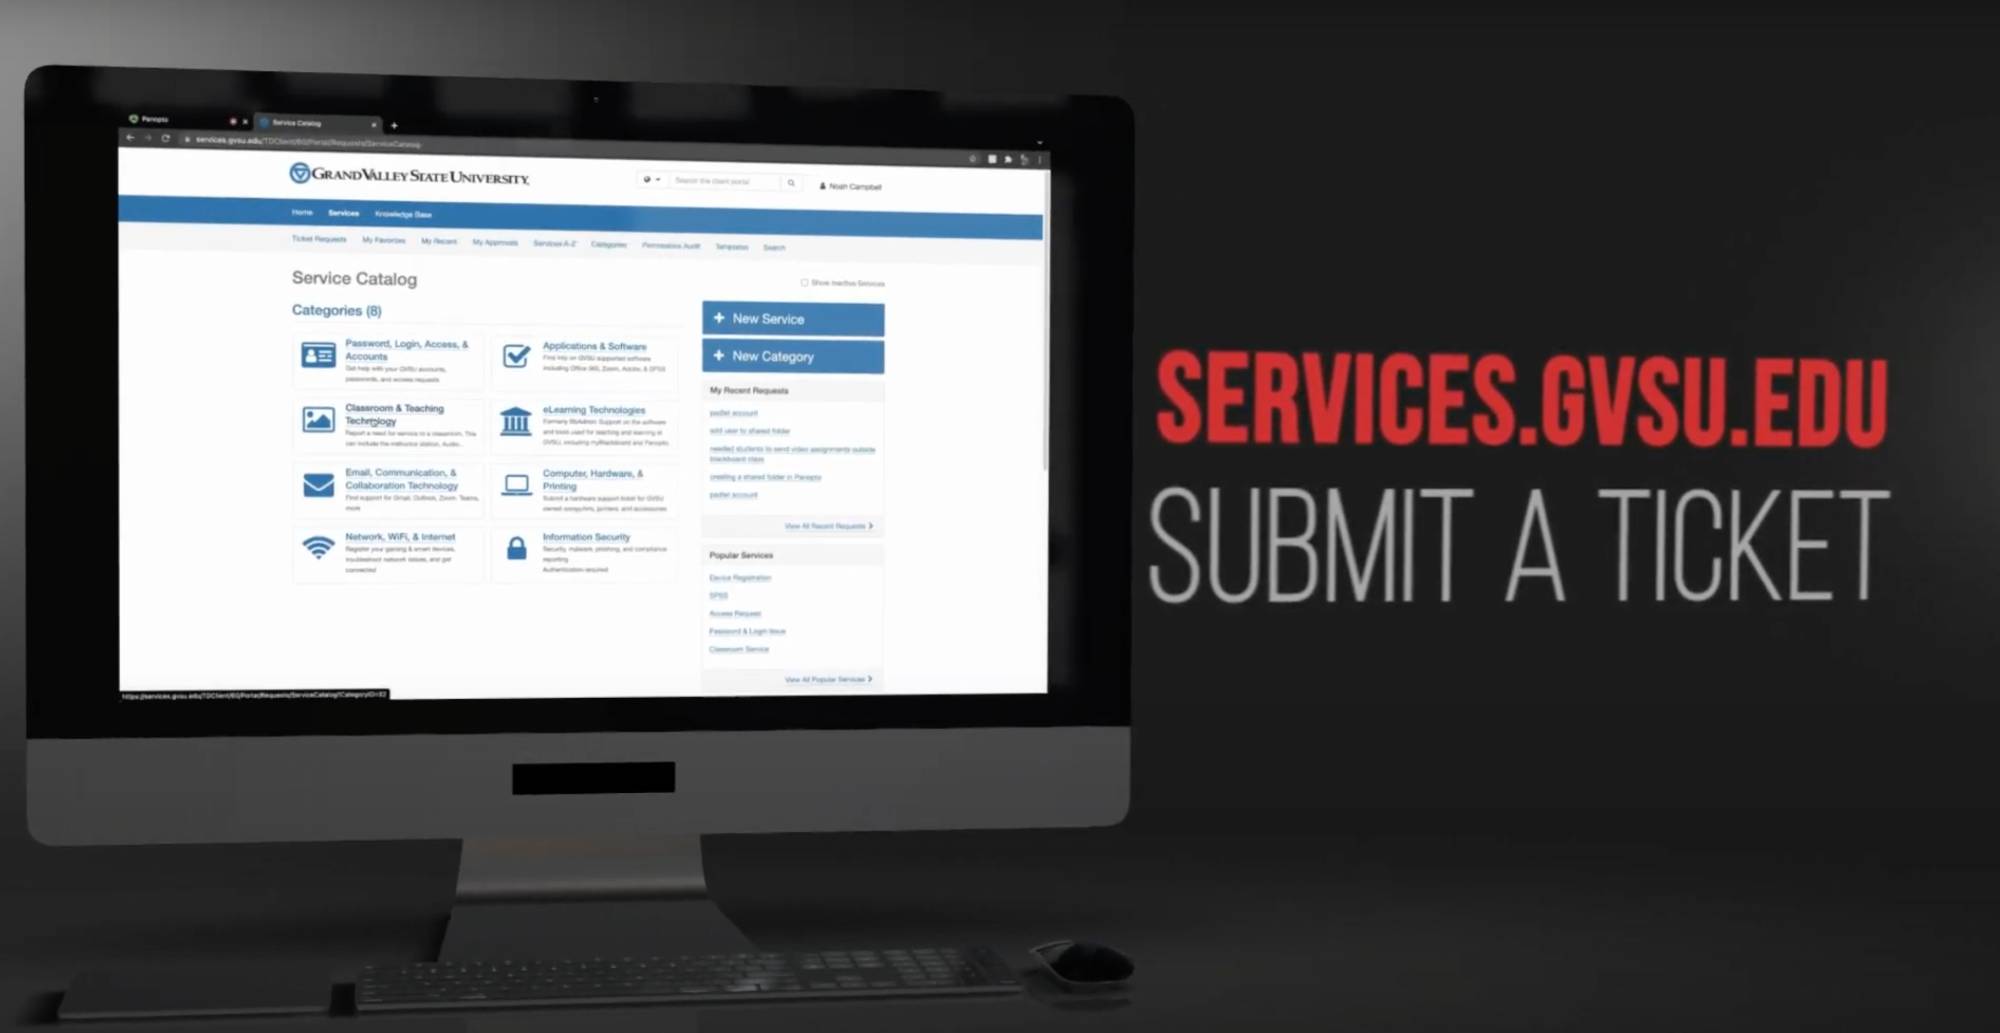 Submit a ticket at the service portal